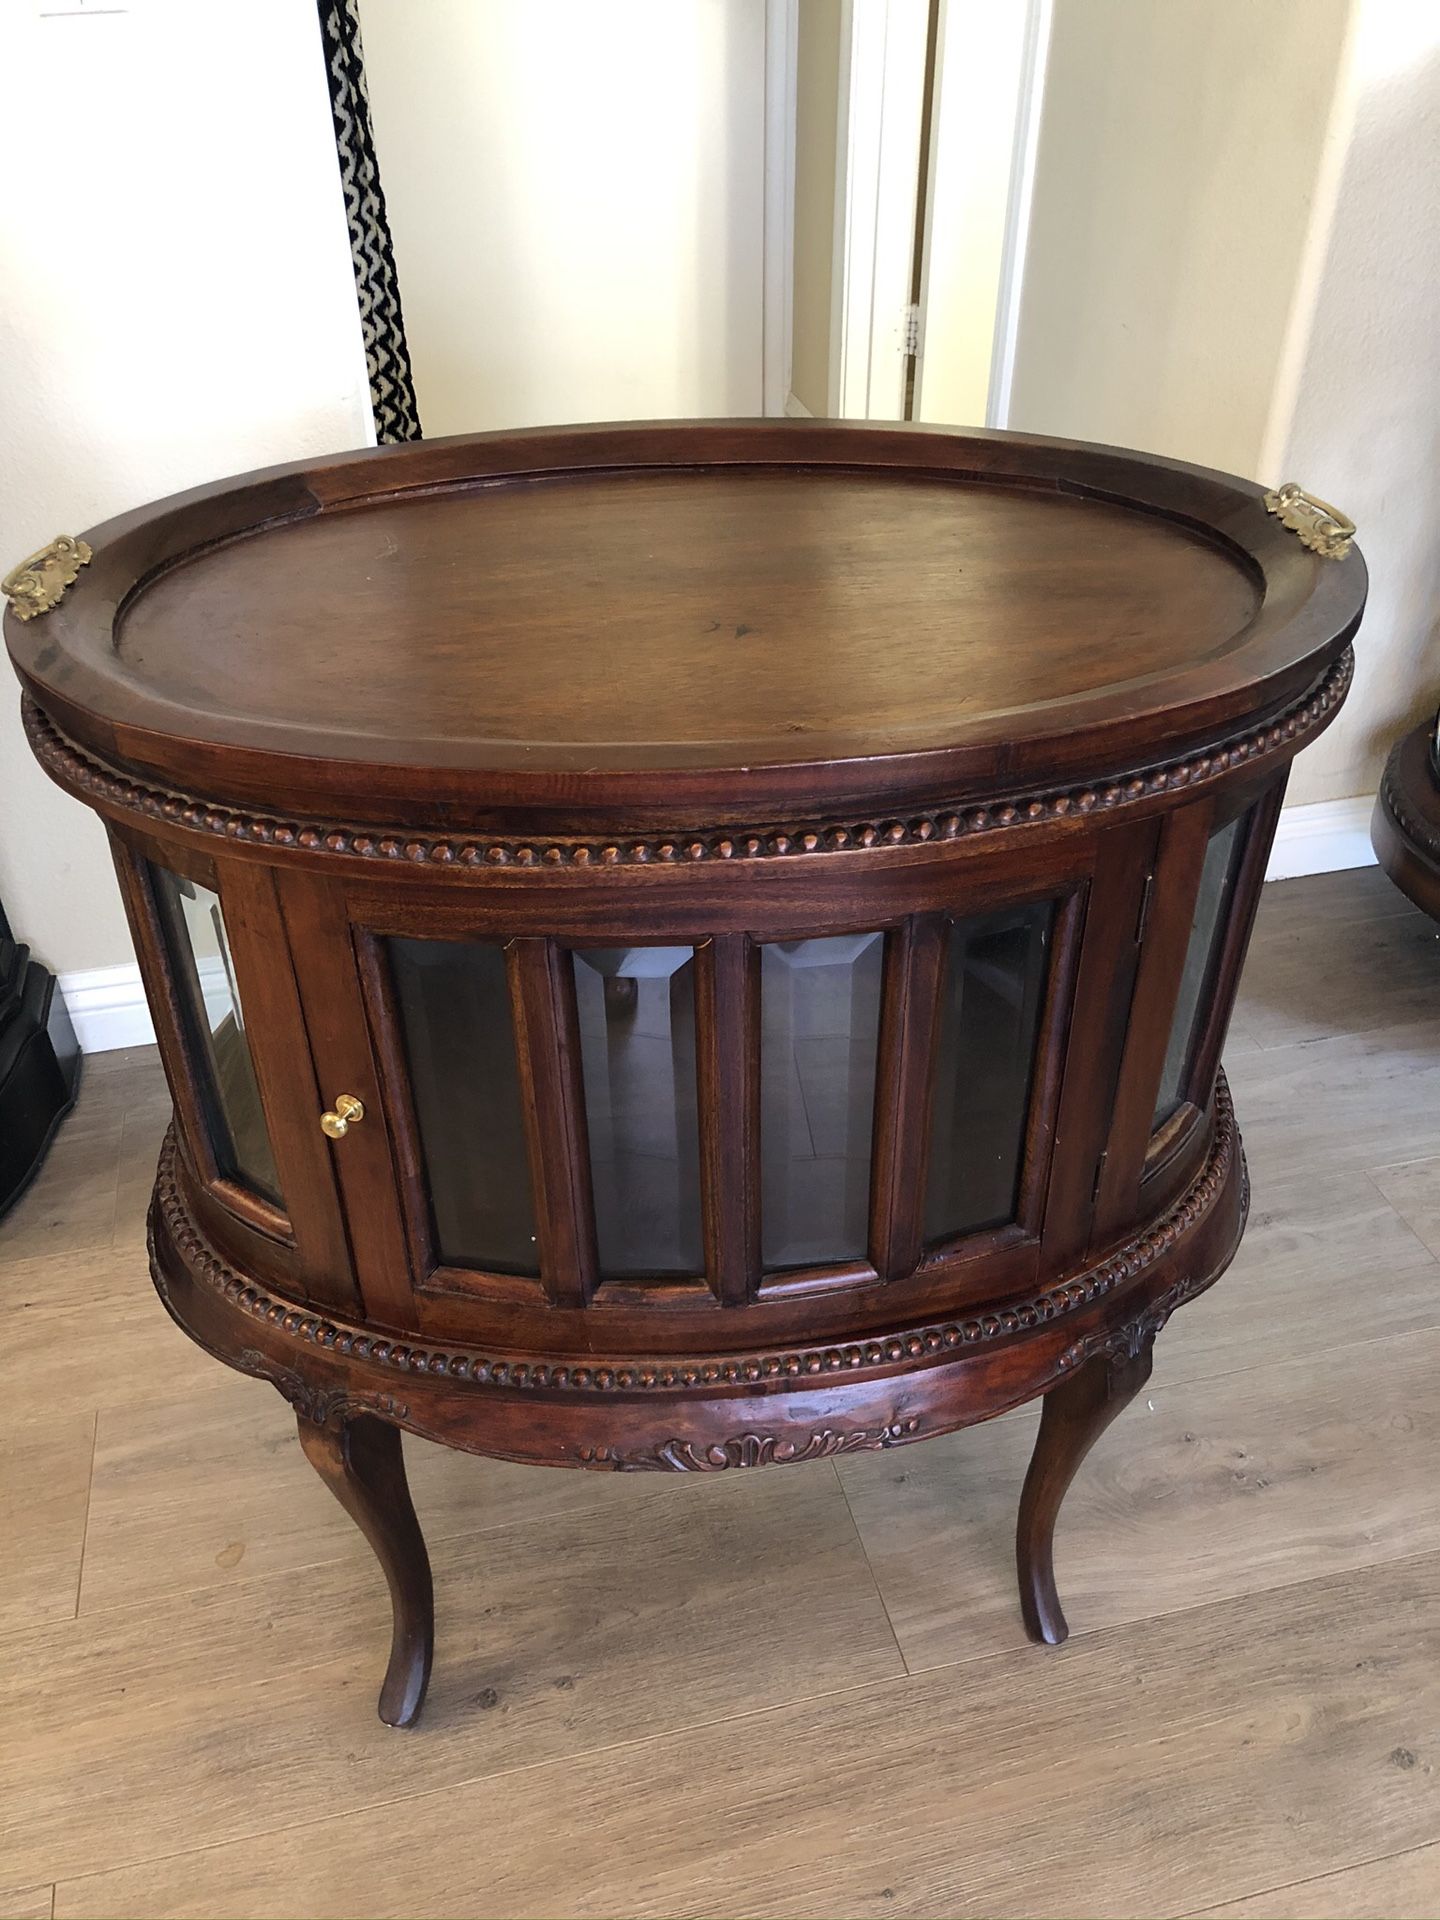 Antique Tea Table with Serving Tray